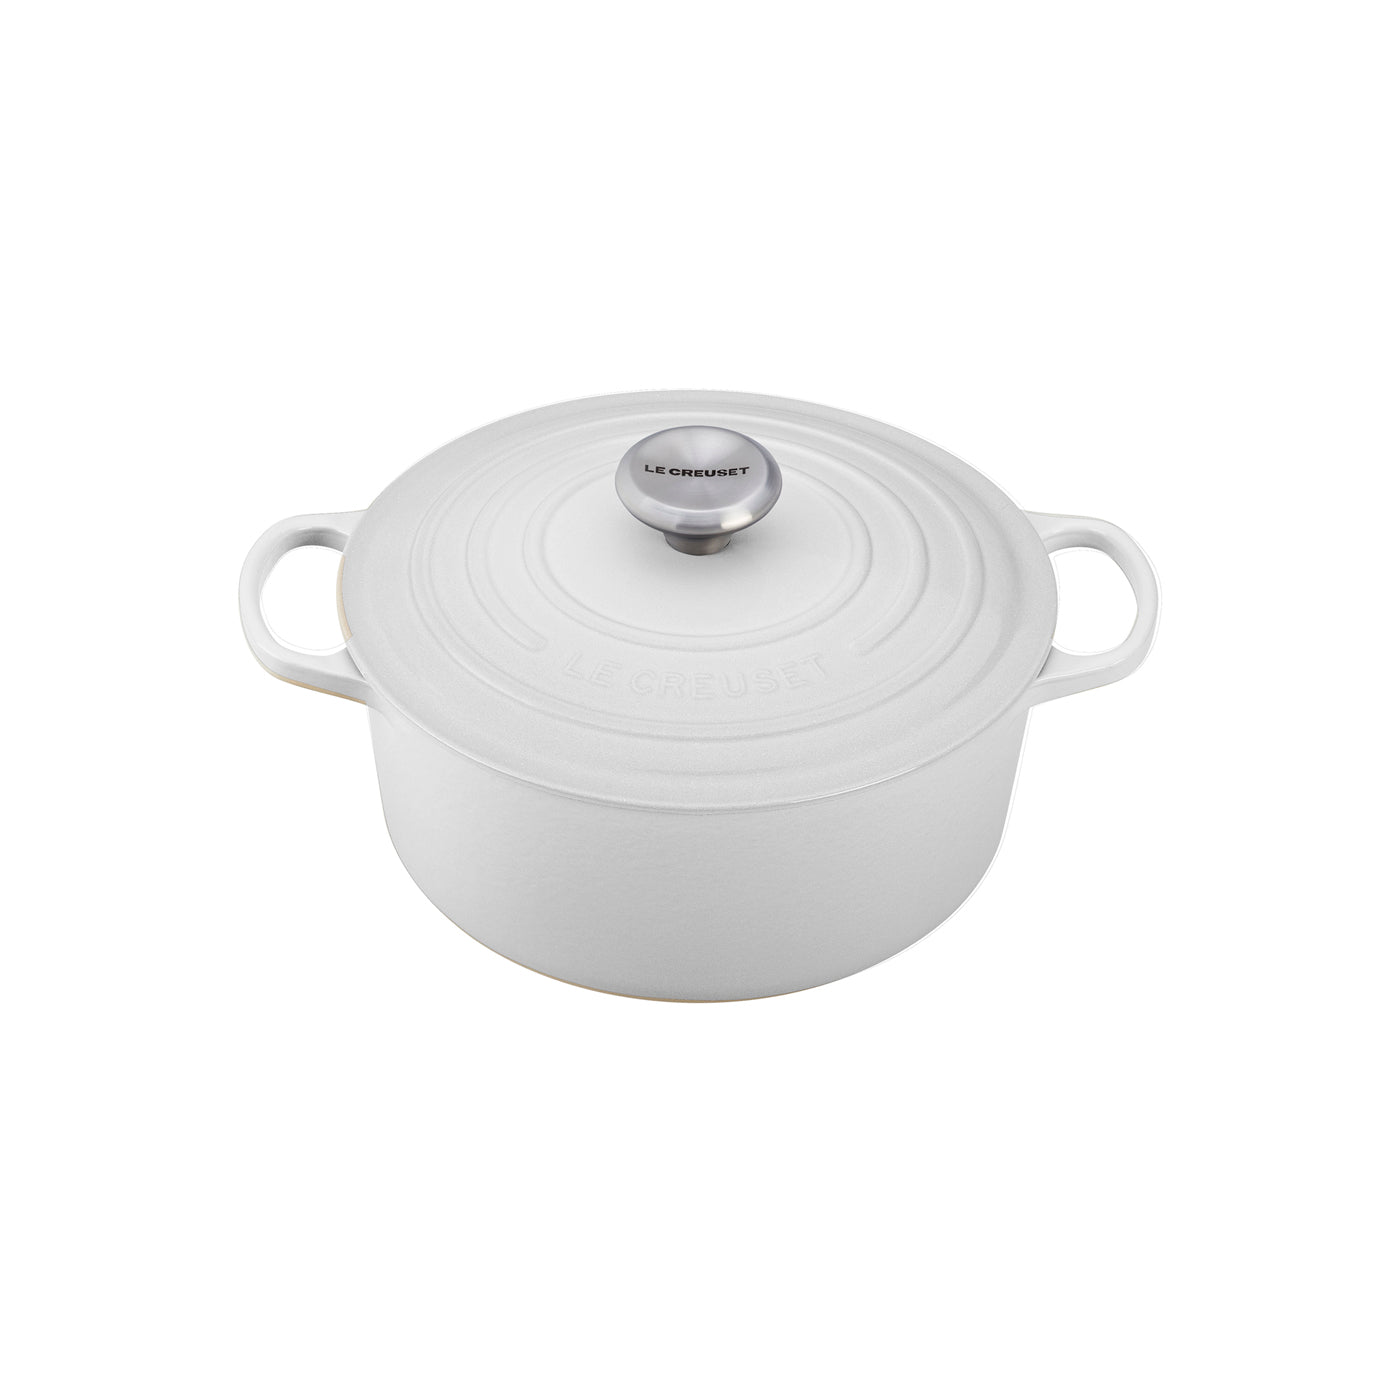 Le Creuset 5 1/2 Qt. Signature Round Dutch Oven w/Stainless Steel